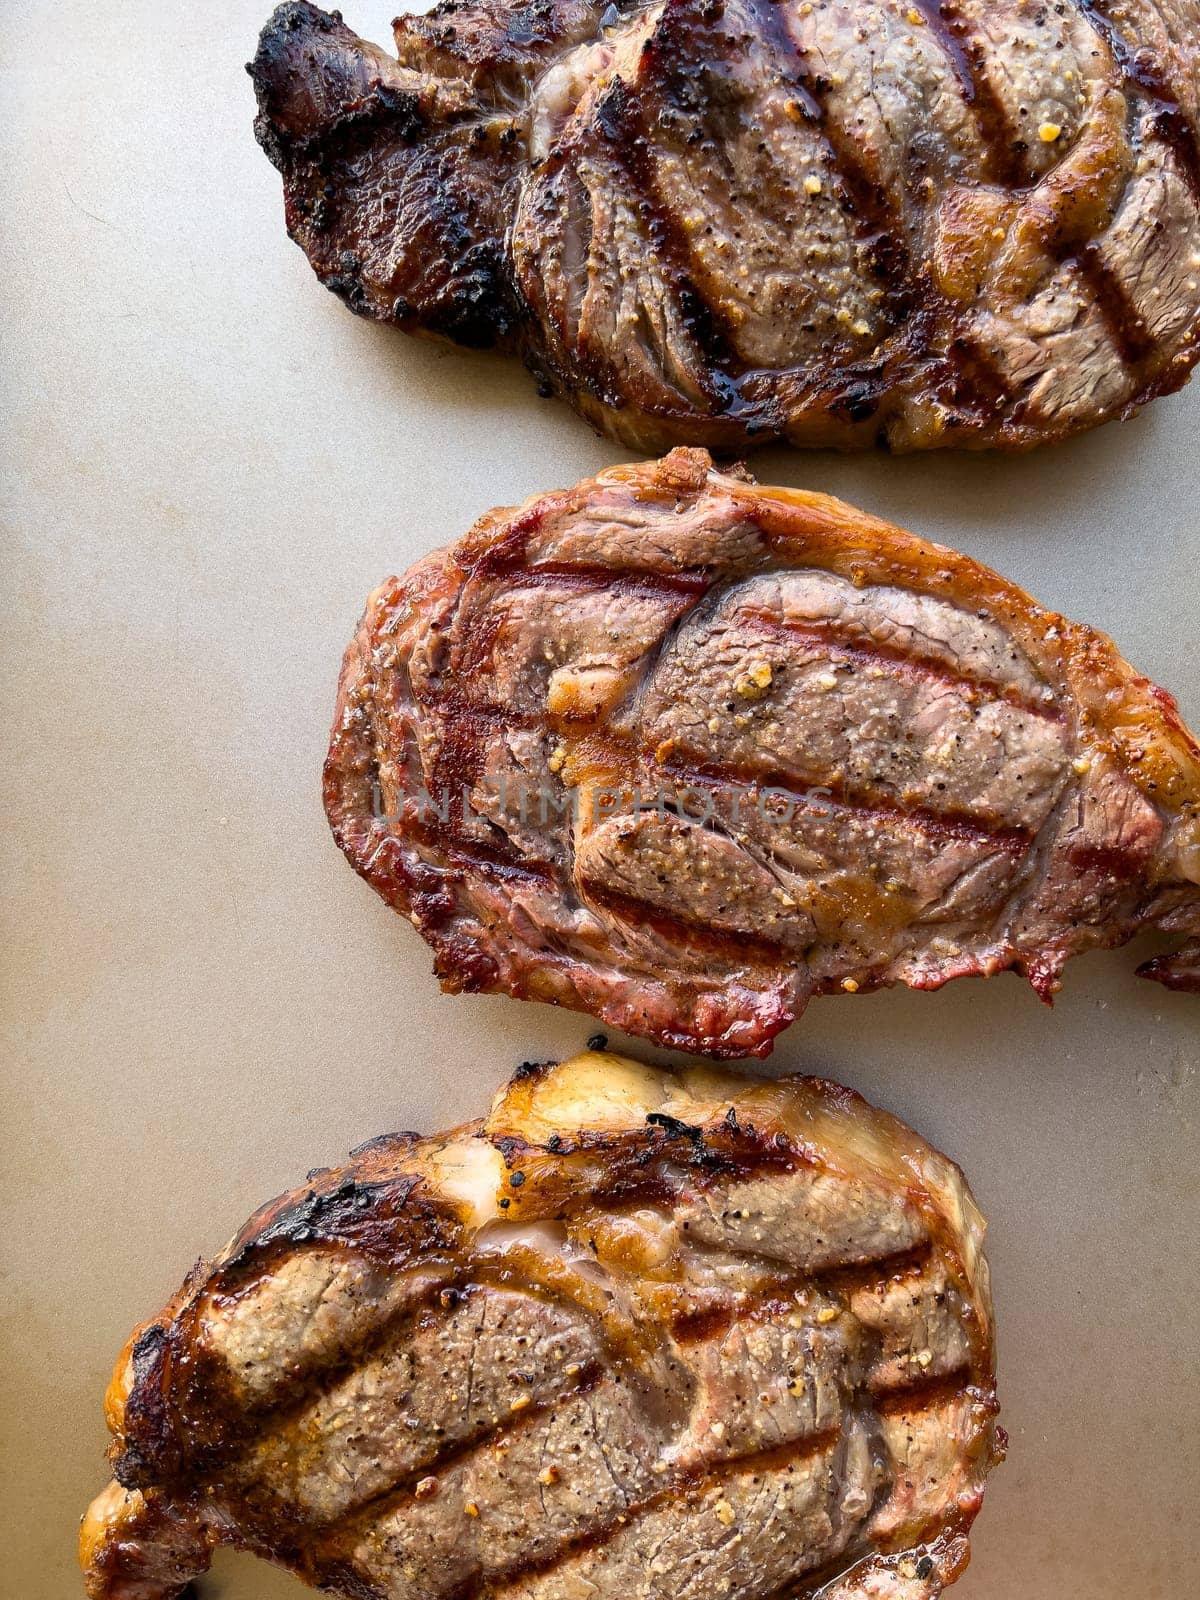 Perfectly Grilled Ribeye Steaks with Charred Edges and Grill Marks by arinahabich